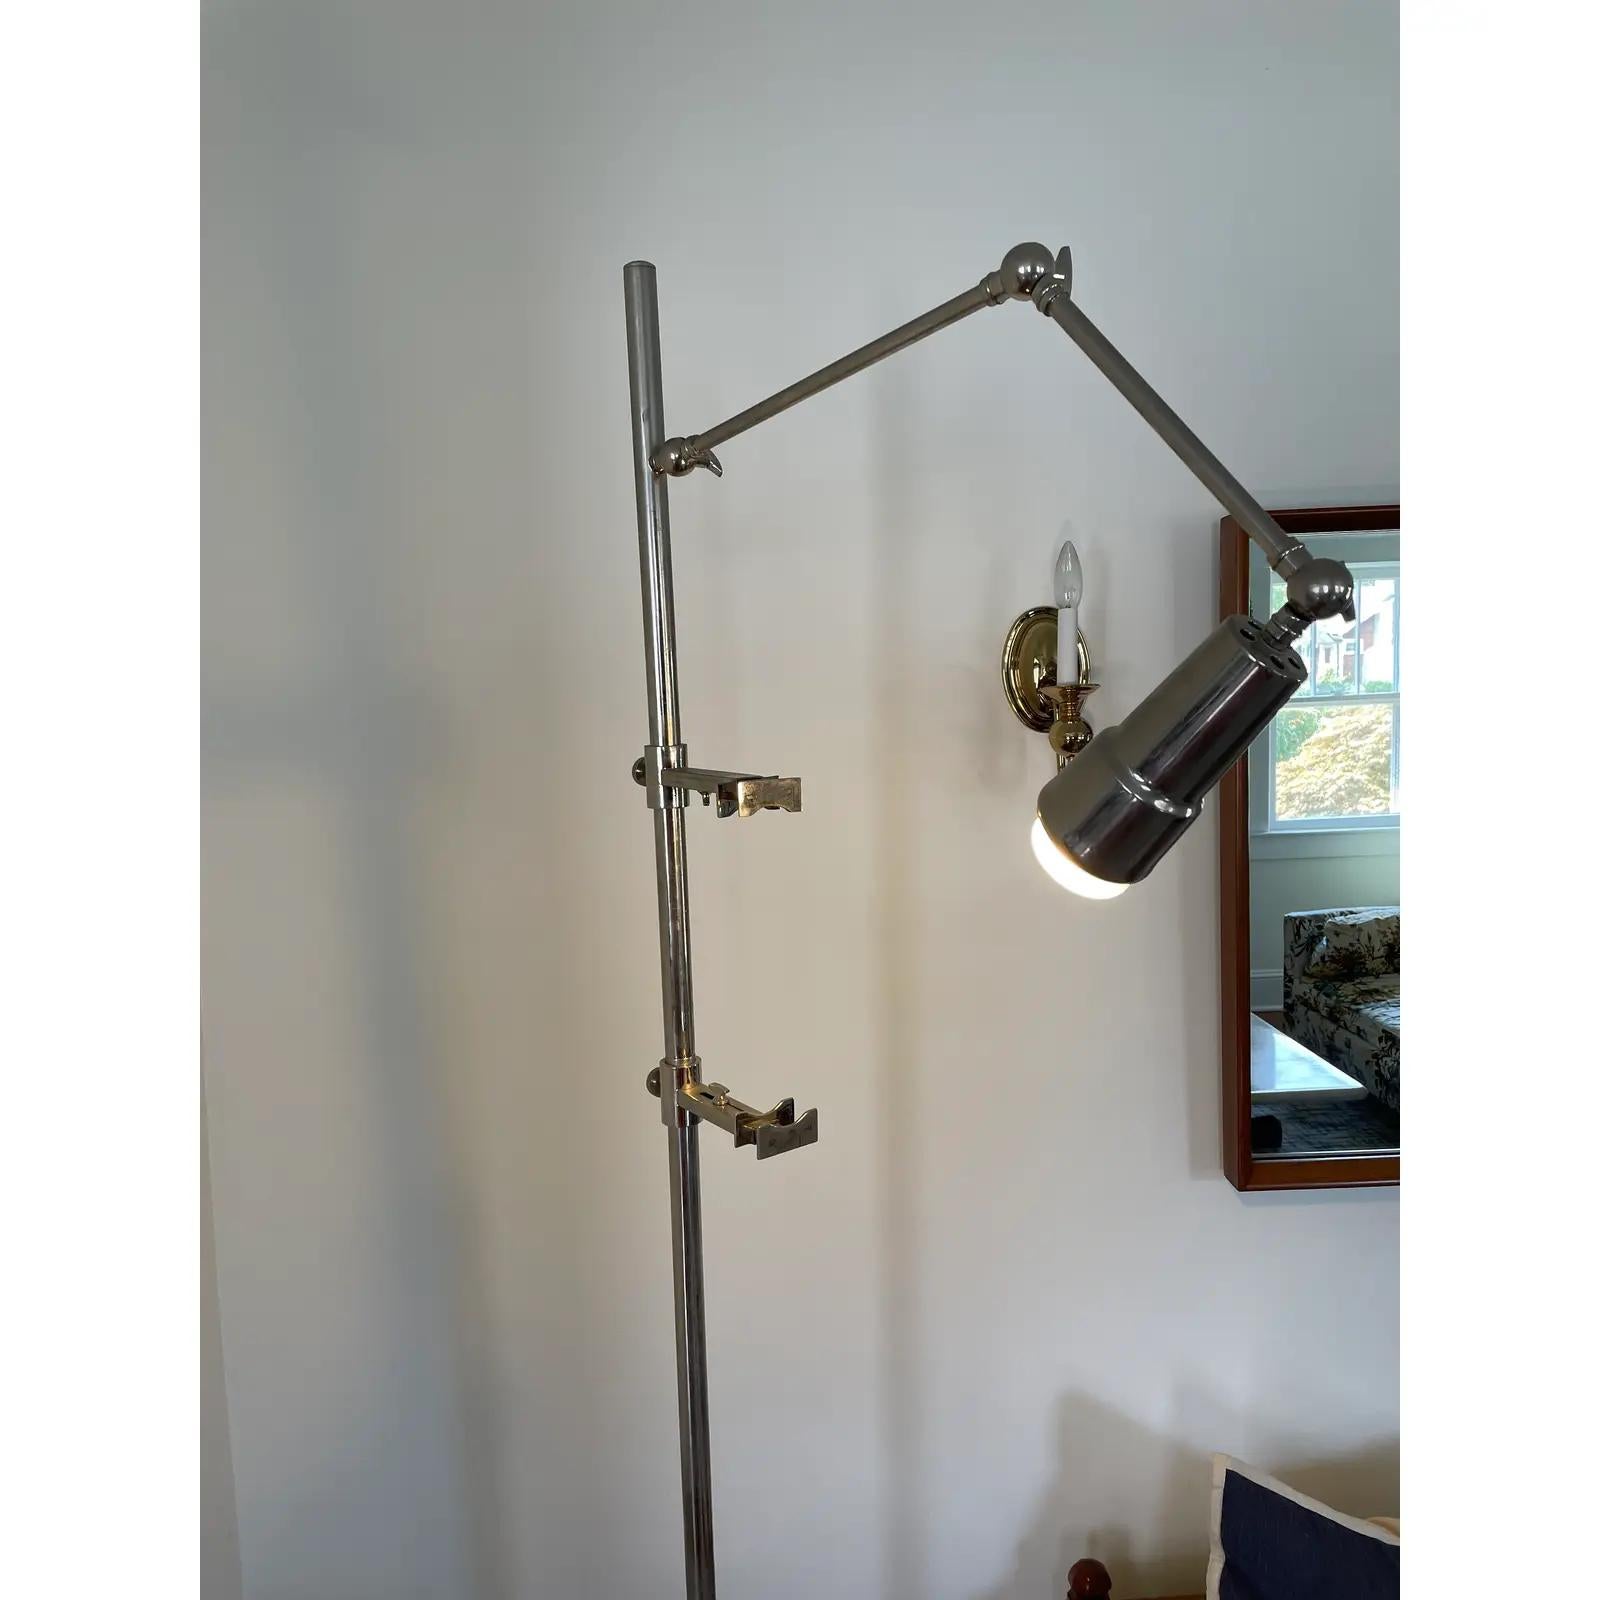 This floor easel lamp captures the spirit of Mid-Century Modern. This example is cast entirely in chrome, has adjustable top and bottom easel claw-hands to display most sizes of artwork.
Curbside to NYC/Philly $400